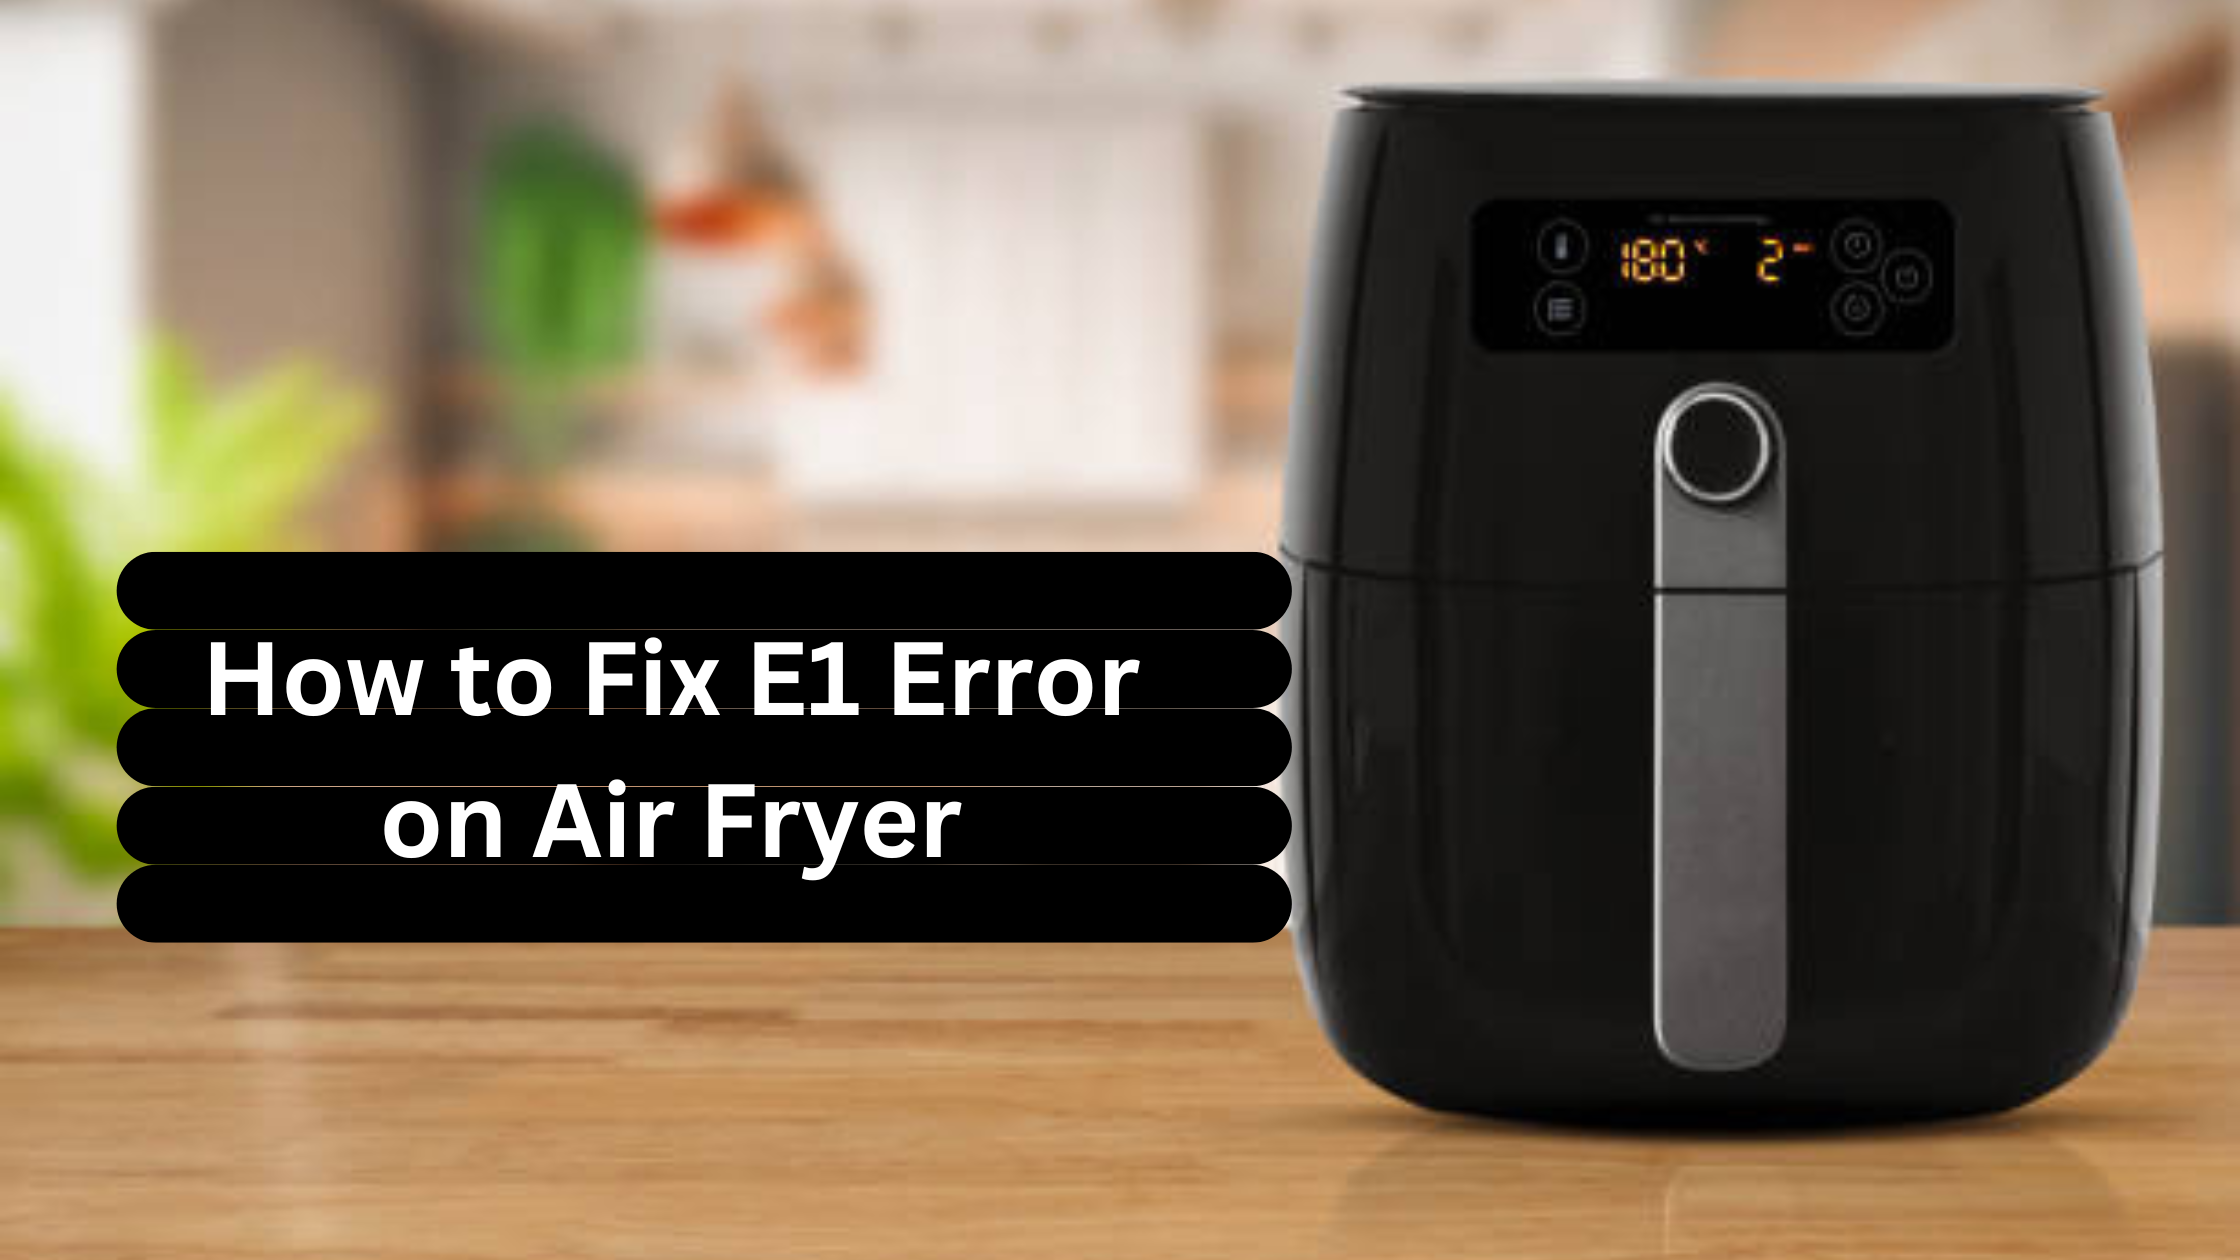 How to Fix E1 Error on Air Fryer